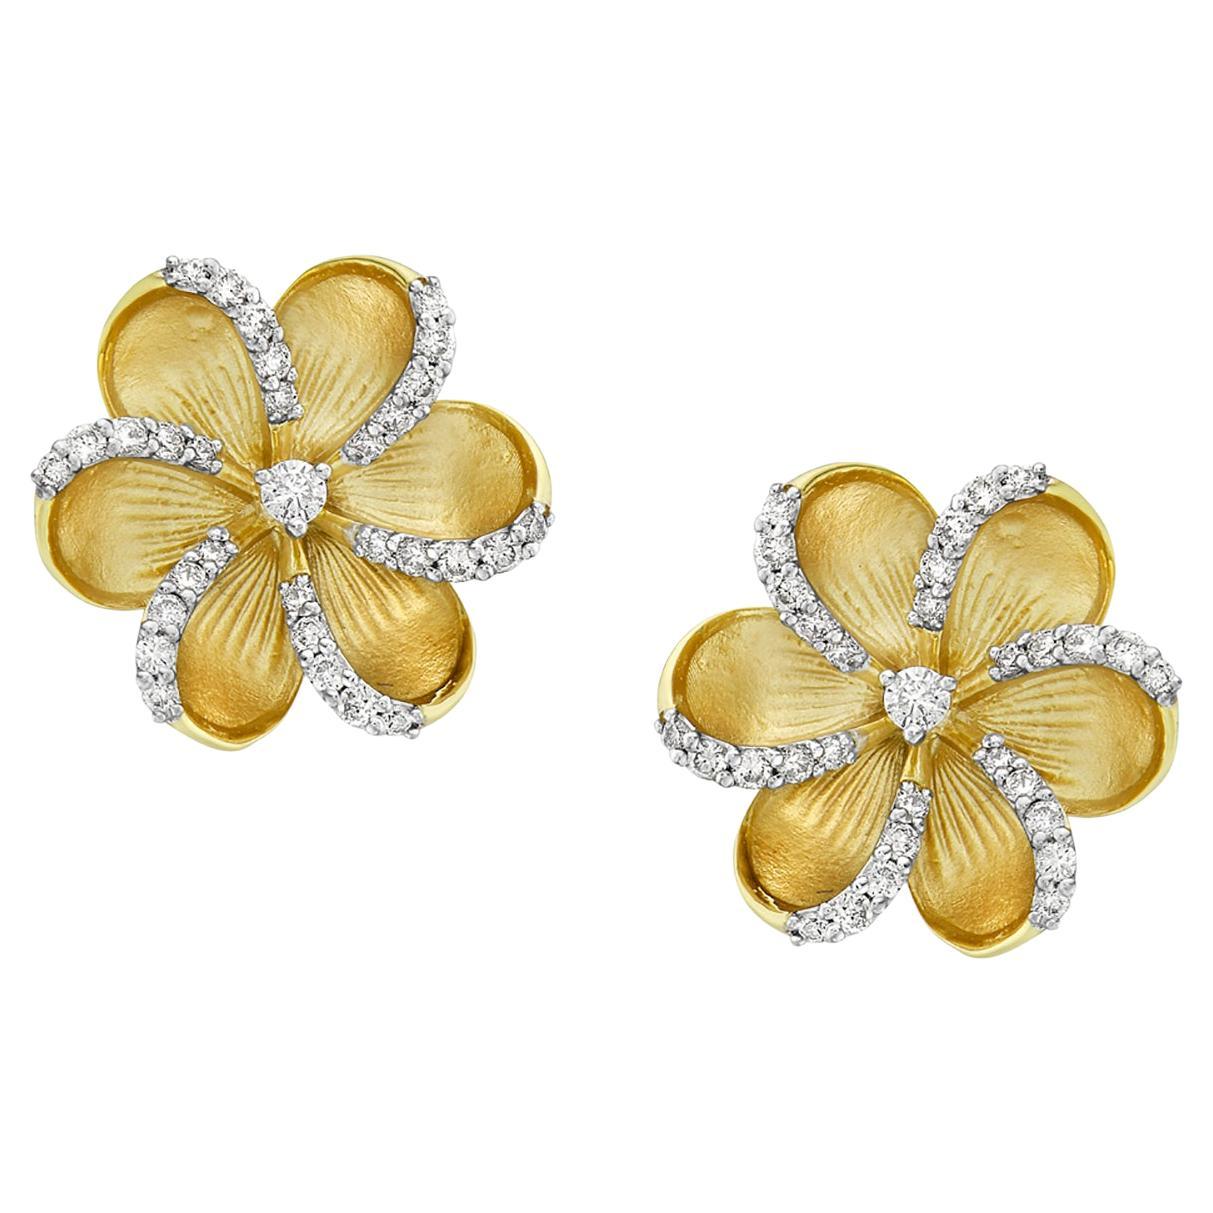 Narcissus Flower Shaped Carved Studs in 14k Yellow Gold Equipped with Diamonds For Sale